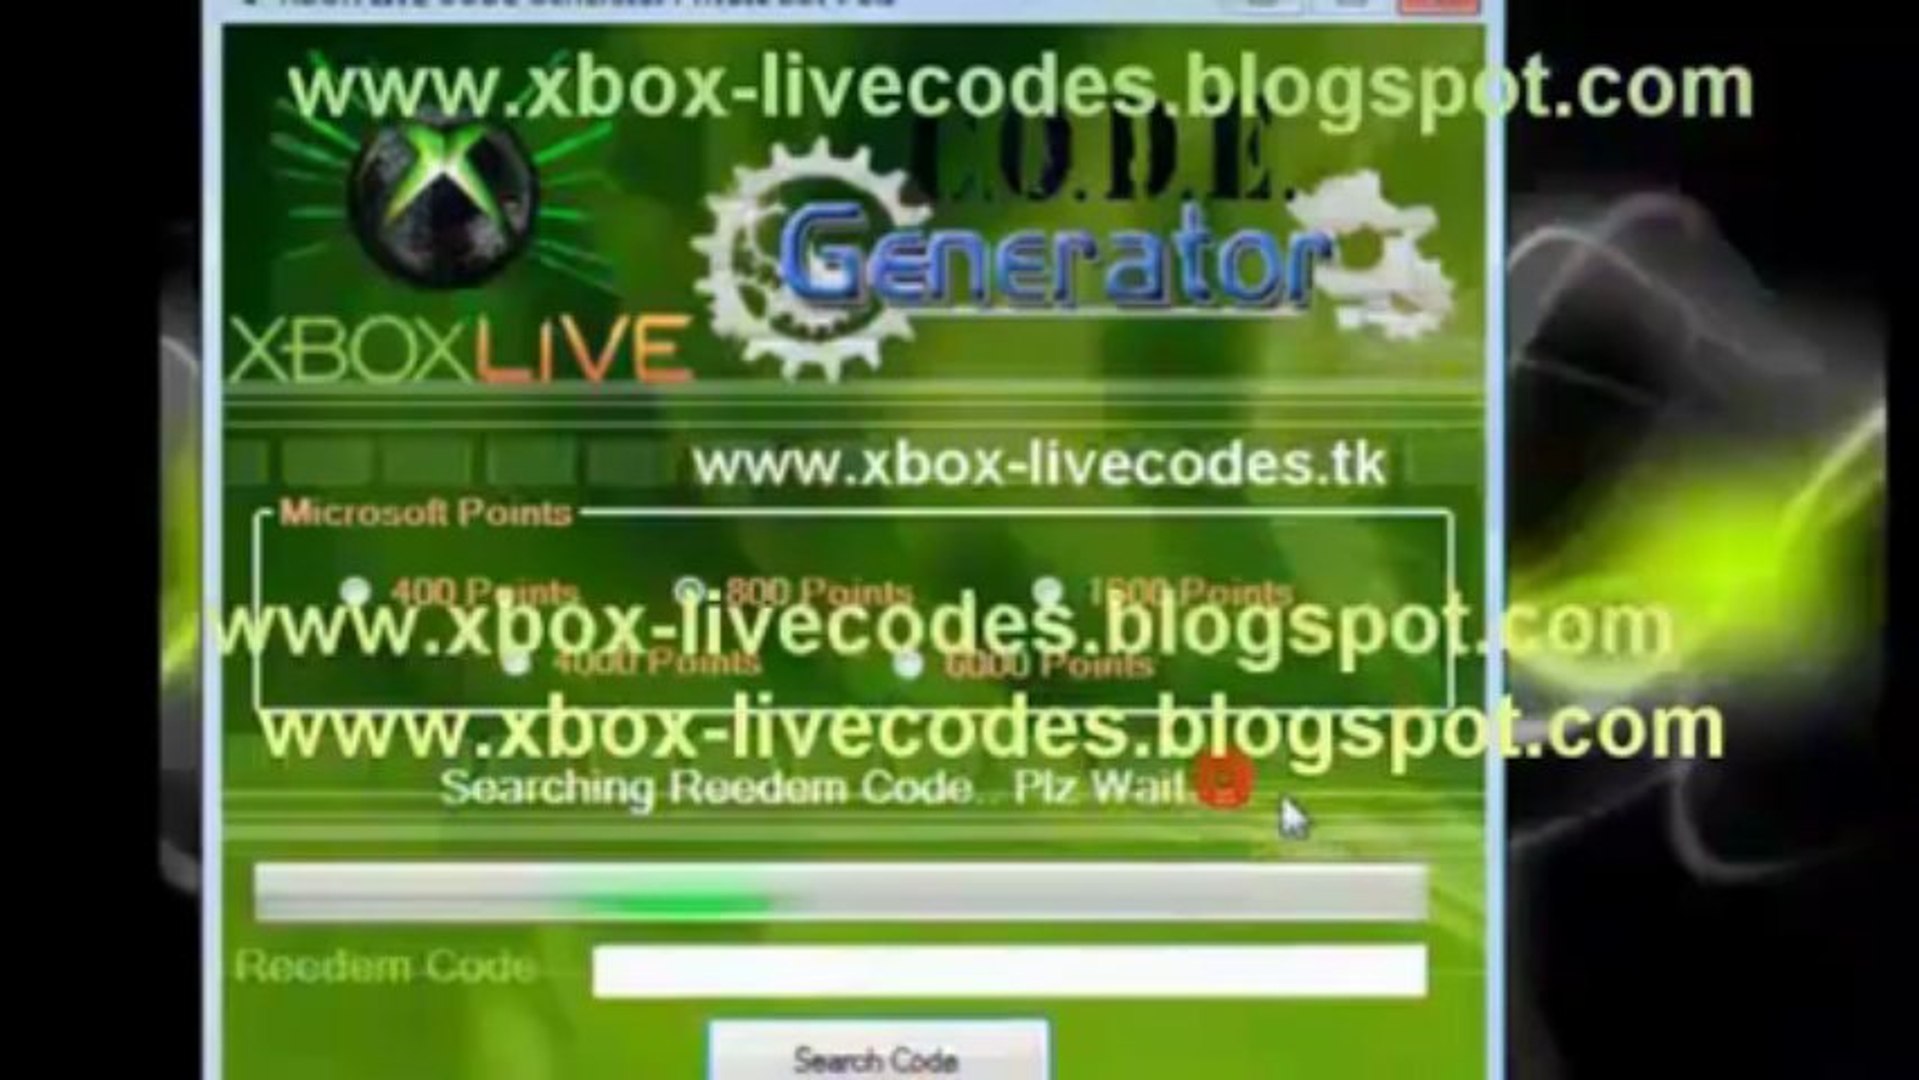 FREE Microsoft Points Generator and Free Xbox 360 Live Code Generator 2013  - video Dailymotion